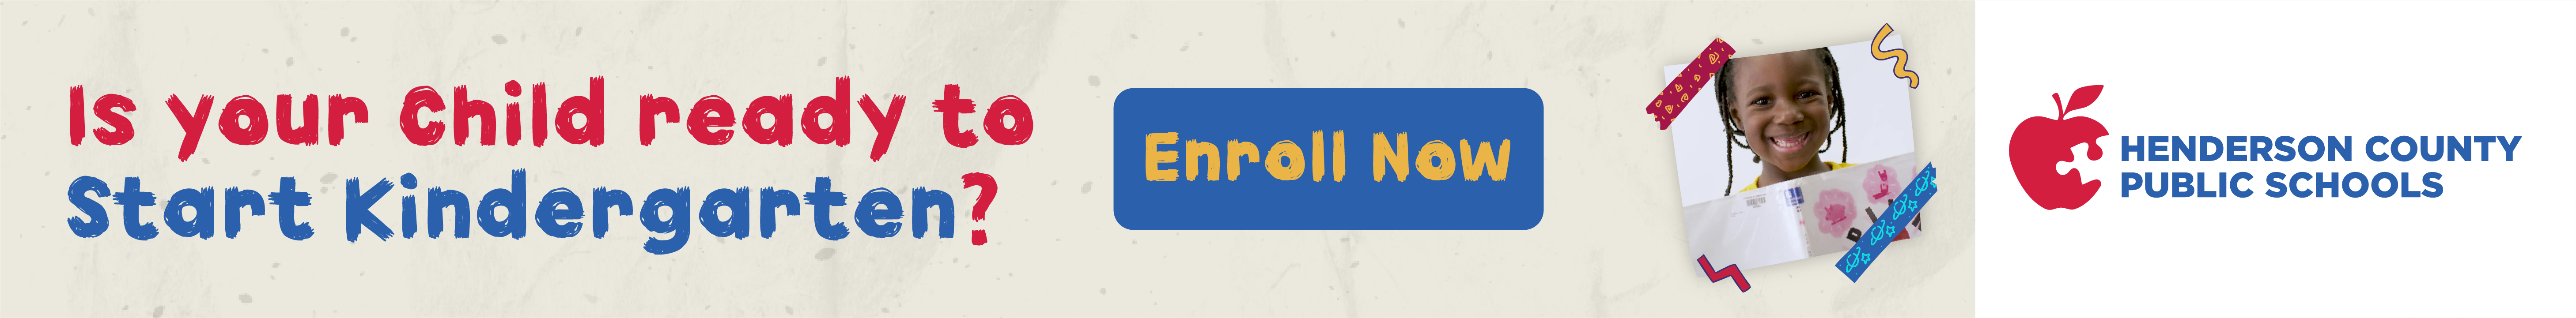 Is your child ready to start kindergarten? Enroll now